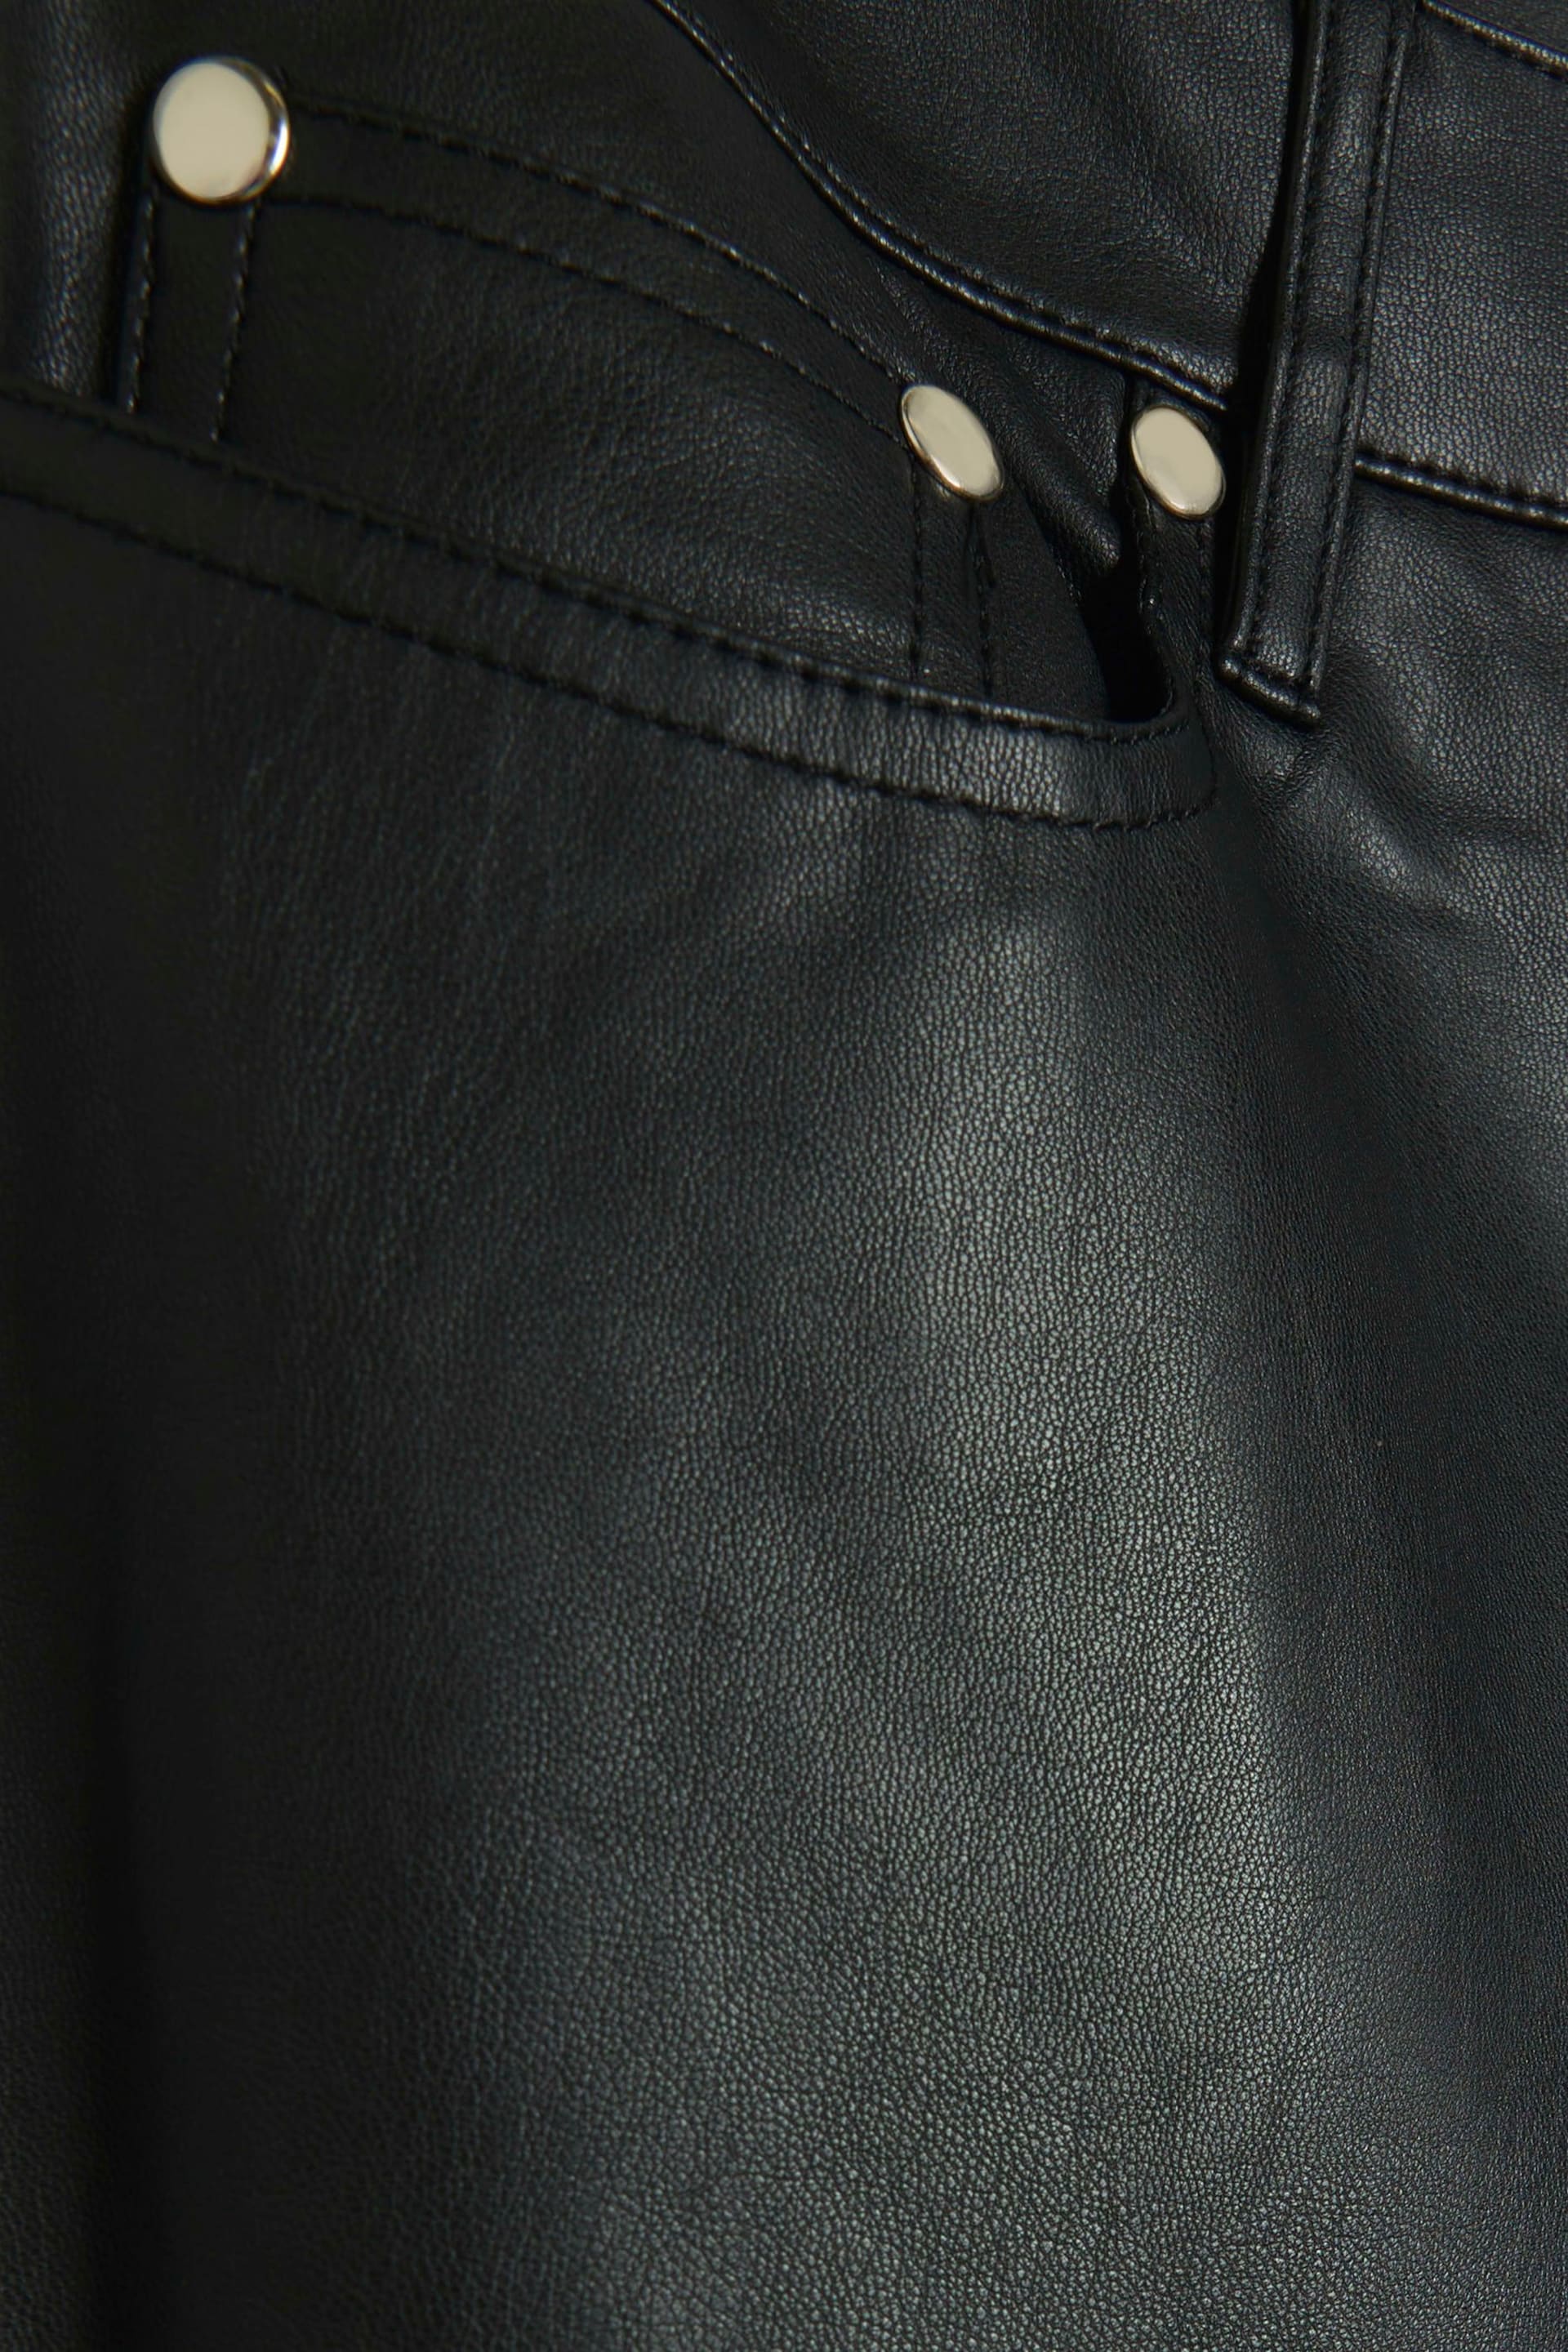 River Island Black Faux Leather Straight Leg Trousers - Image 4 of 4